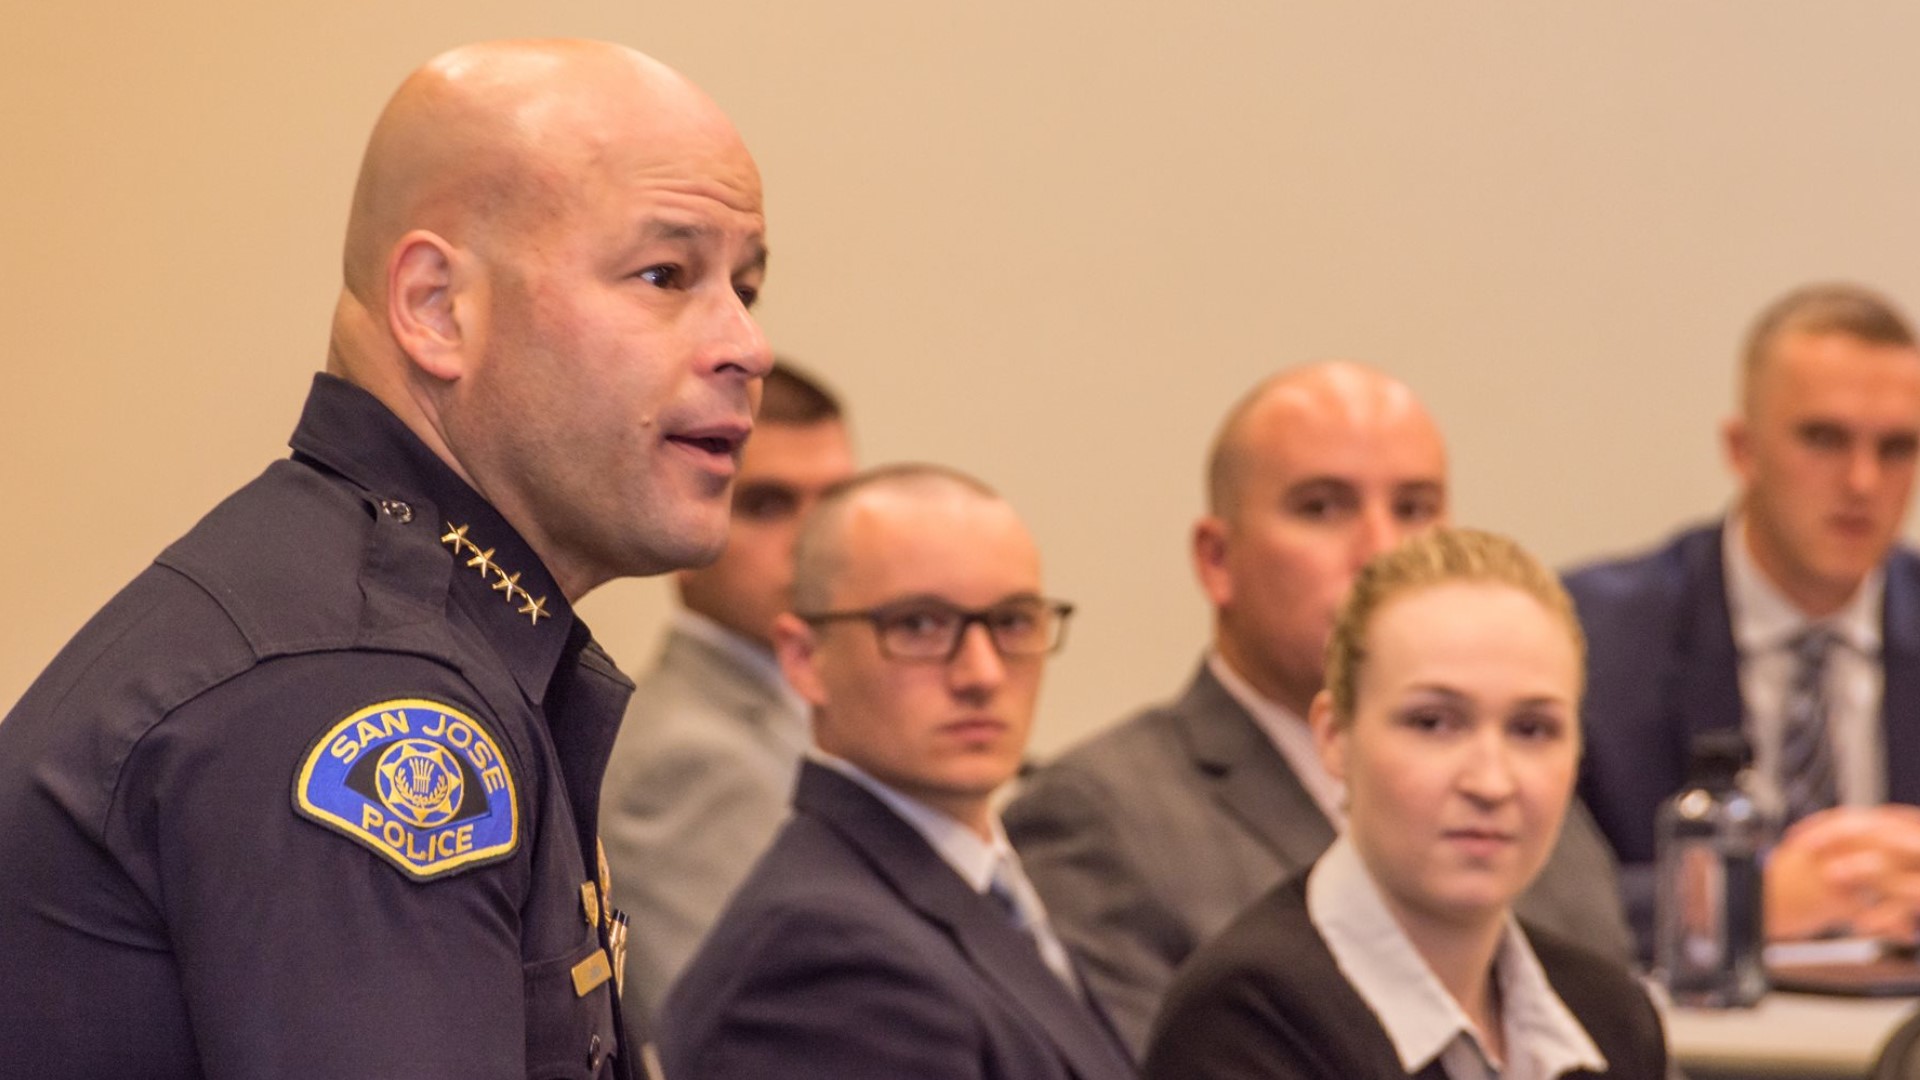 "We should celebrate the fact that Chief Garcia will become our first Hispanic police chief. This truly is an historic moment for Dallas," Mayor Eric Johnson said.